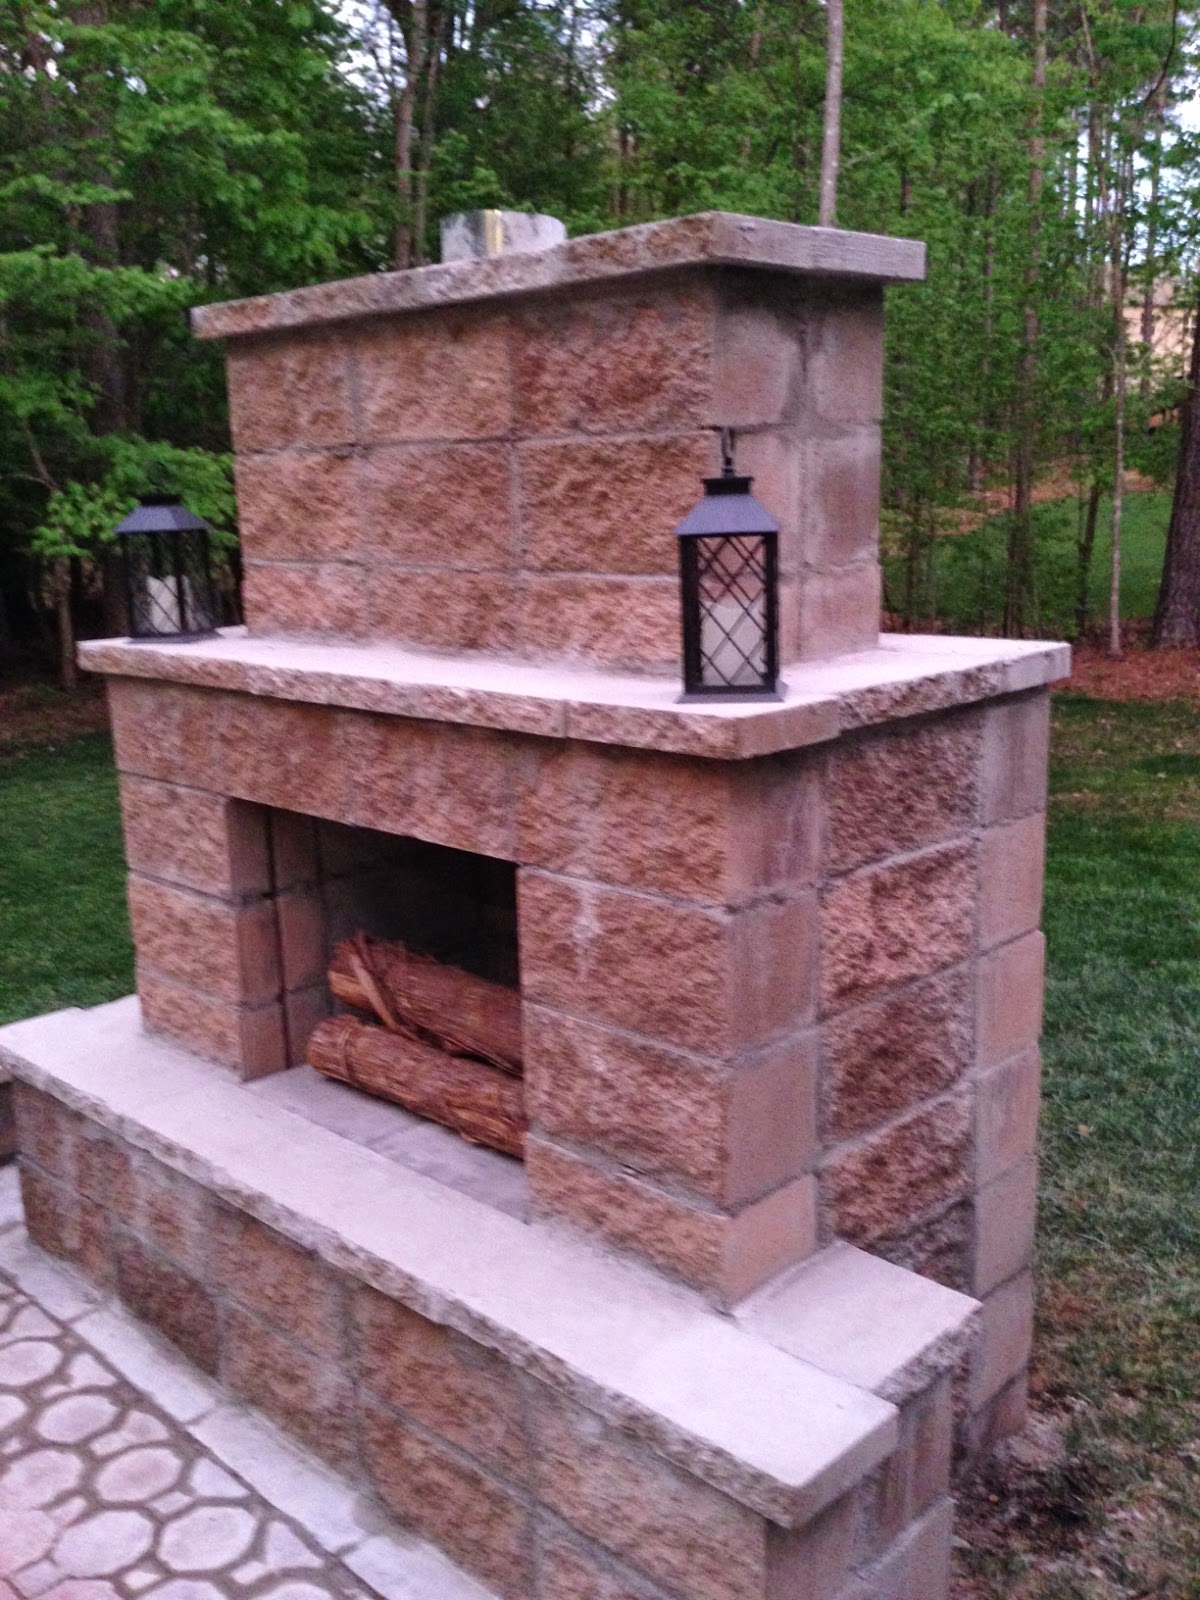 Life in the Barbie Dream House: DIY Paver Patio and Outdoor Fireplace Reveal!